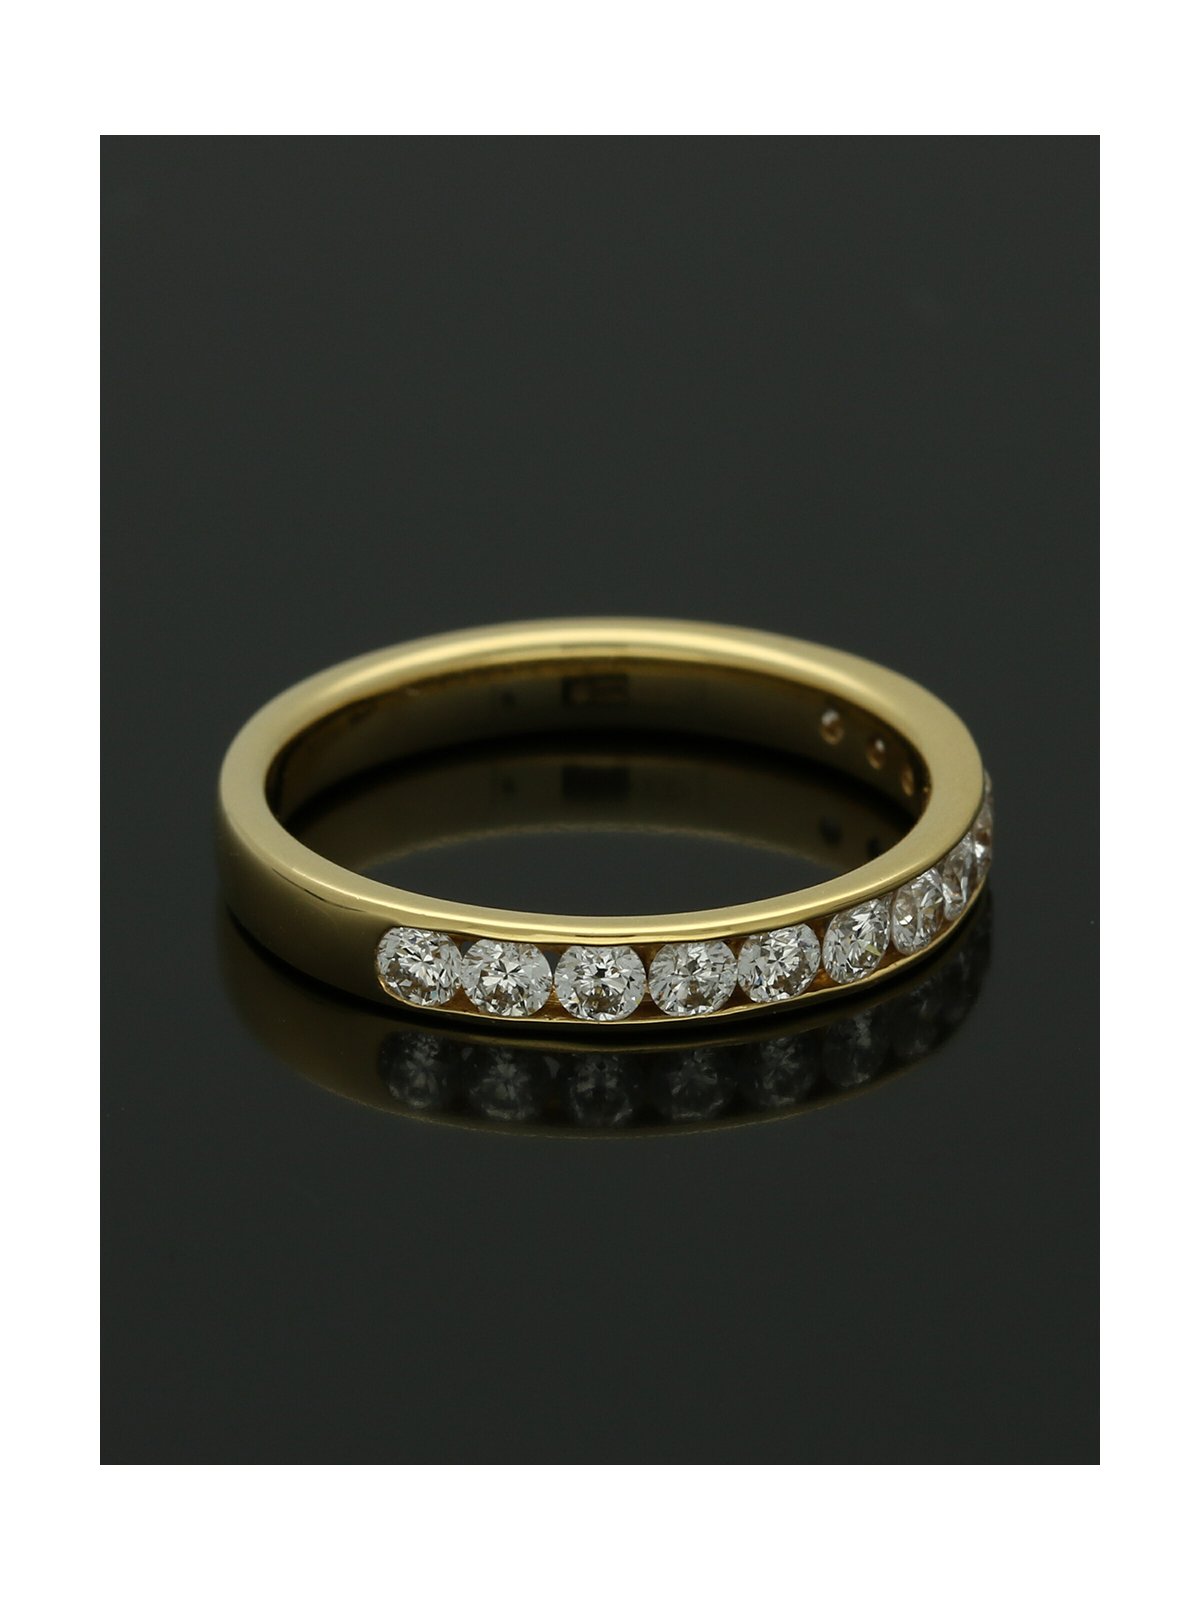 Diamond Half Eternity Ring Certificated 0.75ct Round Brilliant Cut in 18ct Yellow Gold